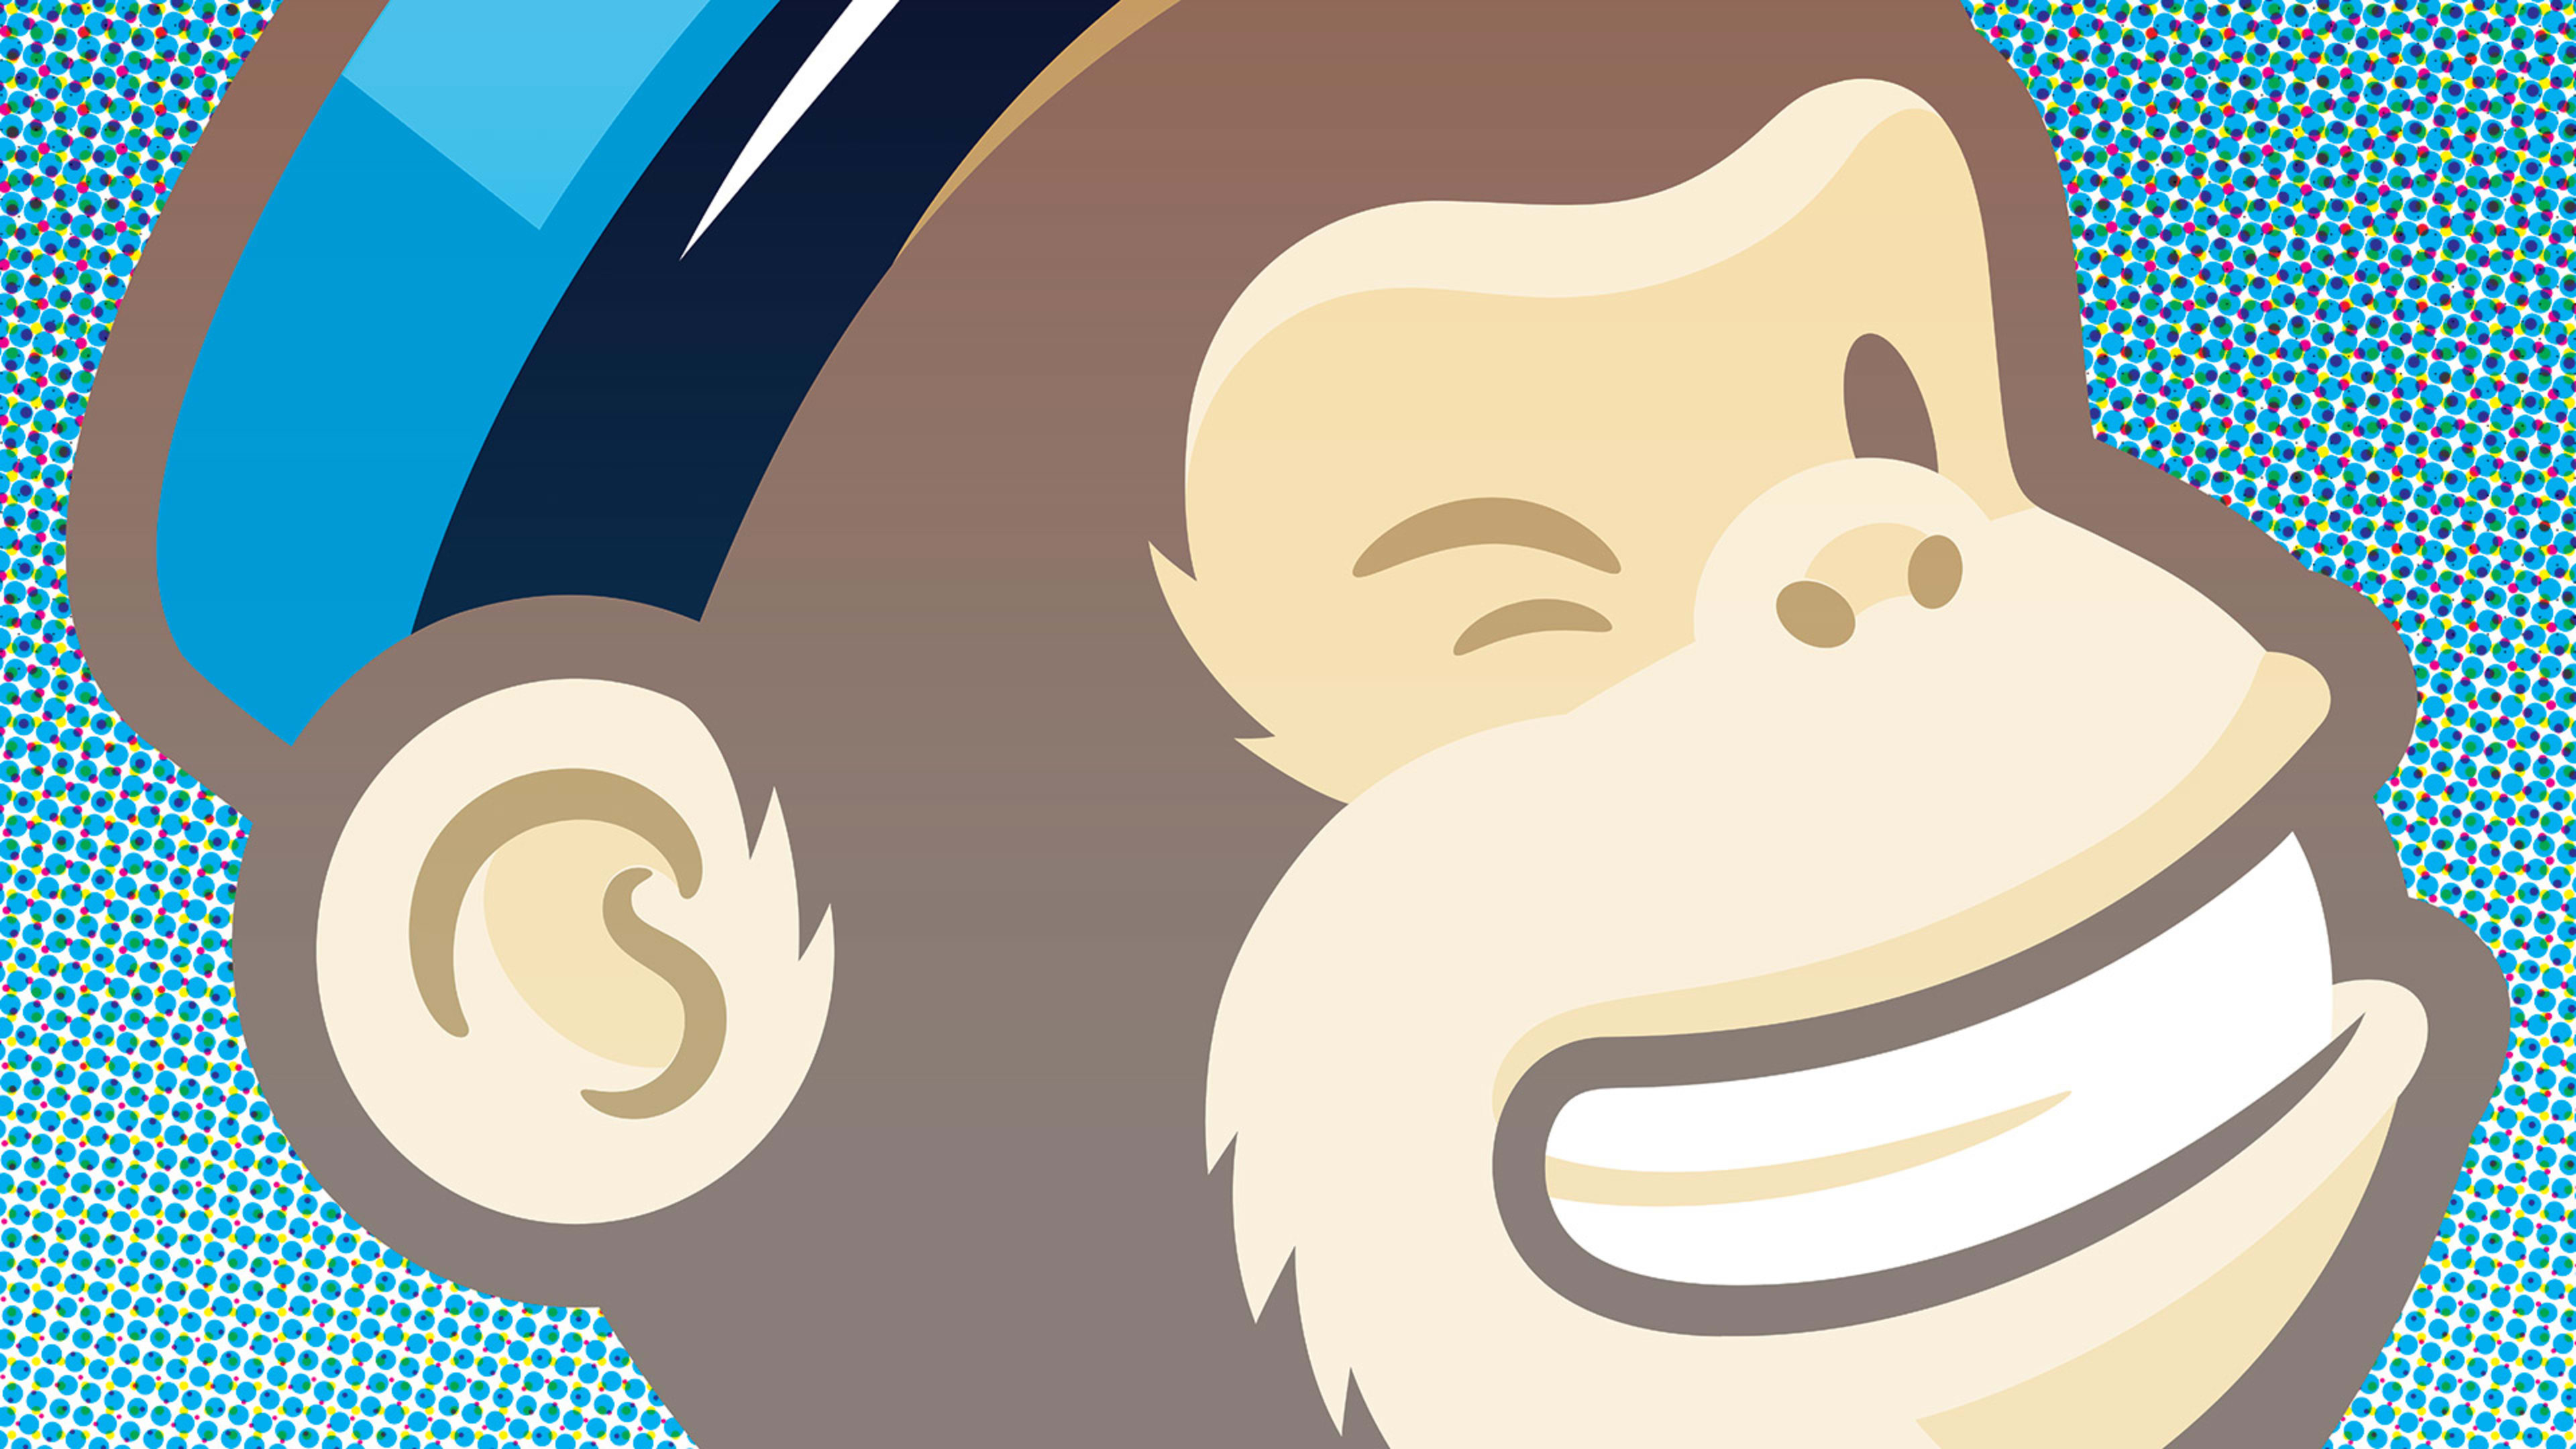 MailChimp Wants To Solve Every Small-Biz Marketing Challenge (Even Snail Mail)